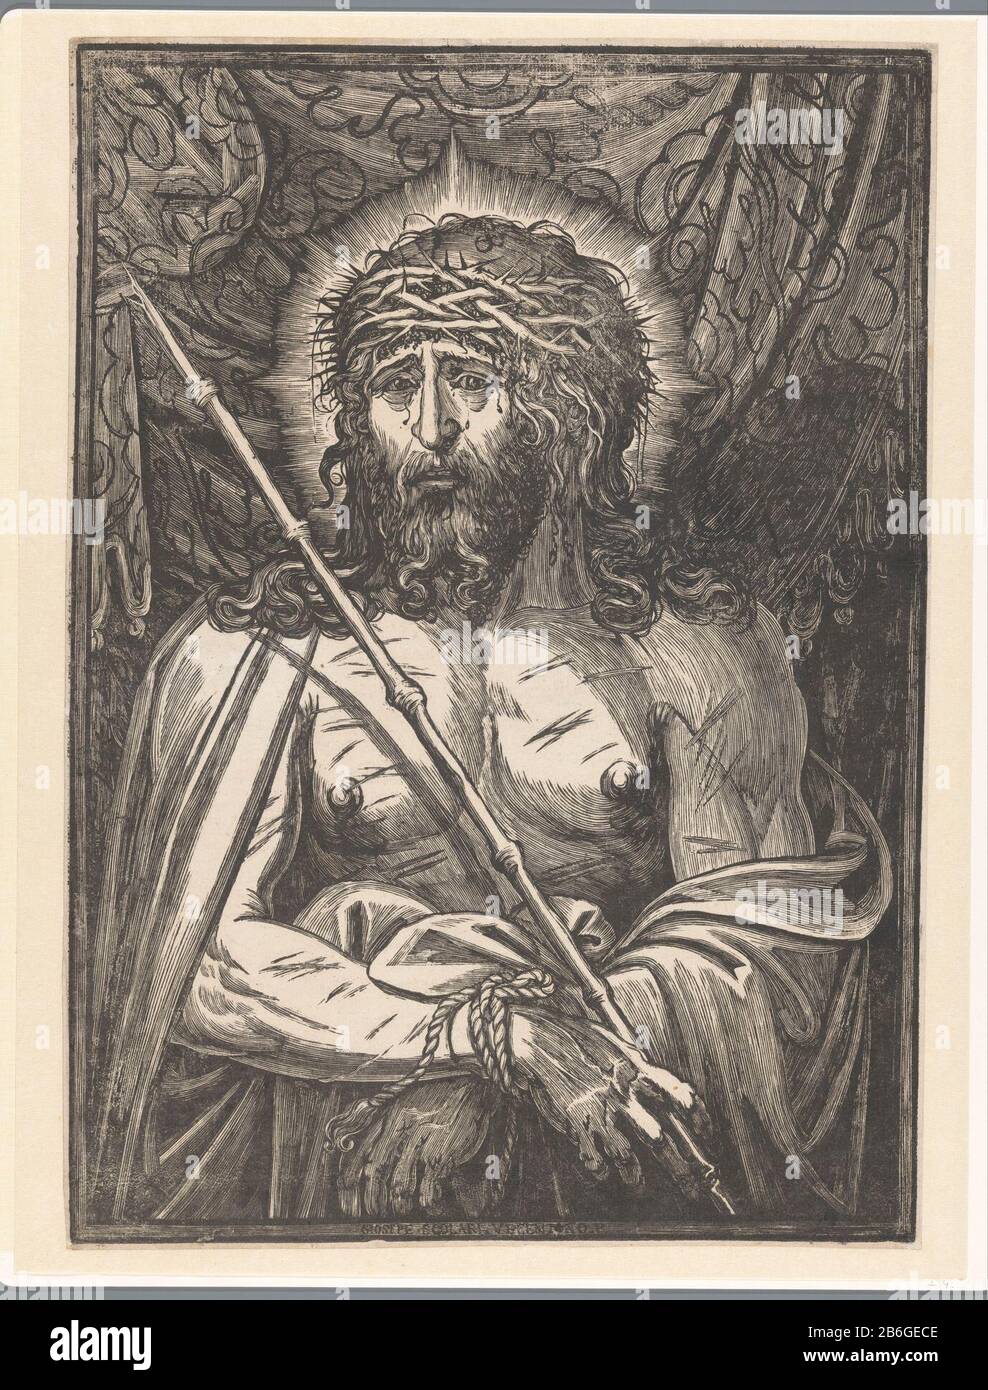 Christ as the Man of Sorrows Christ as the Man of Sorrows, with bound hands and the crown of thorns on head. In his hand he holds the reed vast. Manufacturer : printmaker Giuseppe Scolari (listed property) Place manufacture: Italy Date: 1550 - 1600 Material: paper Technique: woodcut dimensions: image: H 534 mm × W 378 mm Subject: Man of Sorrows, 'Imago pietatis ',' ErbÃ¤rmdebild '' Schmerzensmann; the upright Christ showing his wounds Benthic, usually bearing the crown of thorns, and Accompanied by the instruments of the Passion, standing or sitting in his tomb Stock Photo